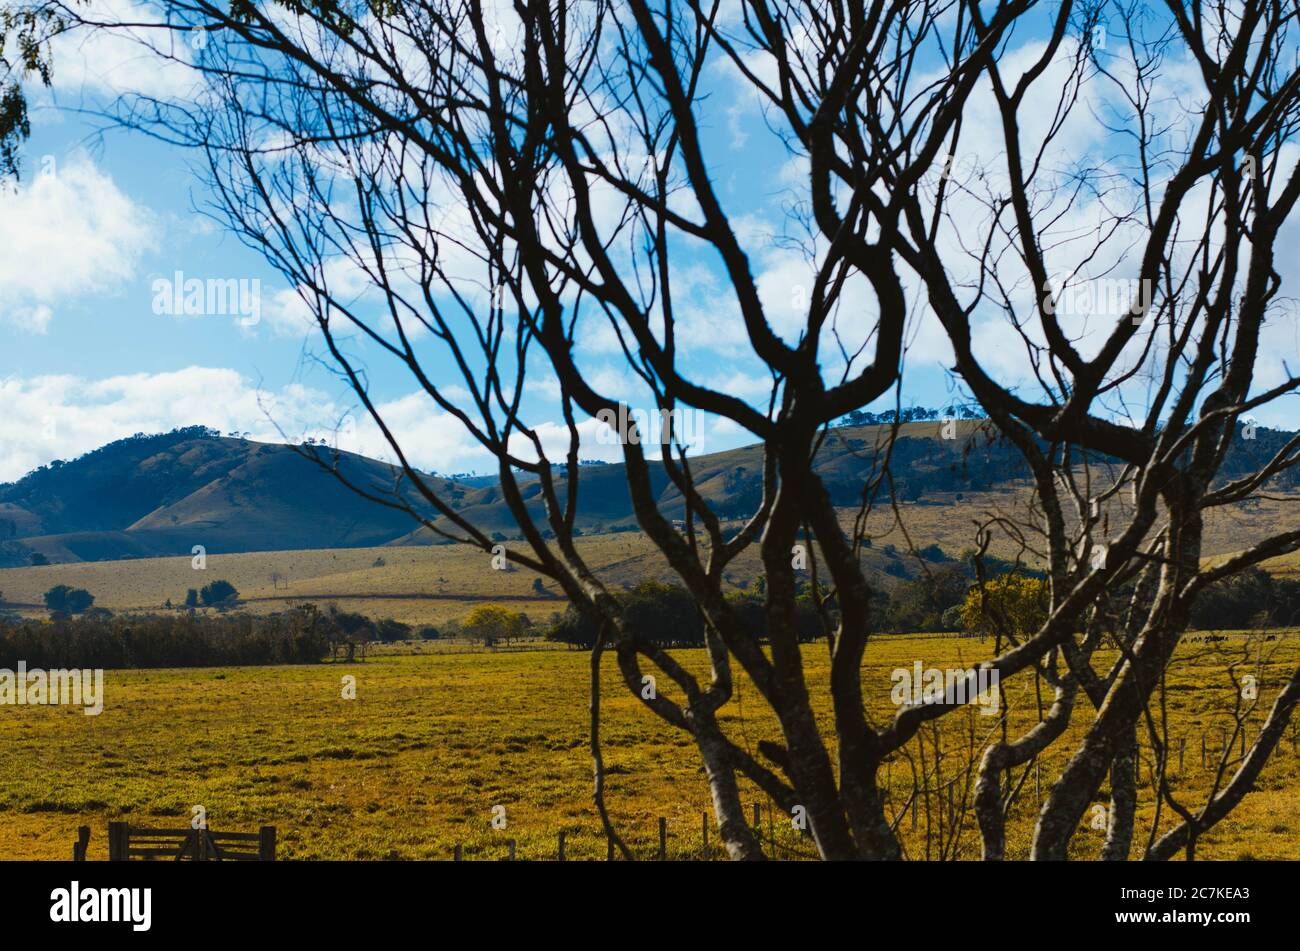 Dramatic view of Minas Gerais hills partially covered by dry tree branches in a cloudy blue sky in the afternoon. Stock Photo